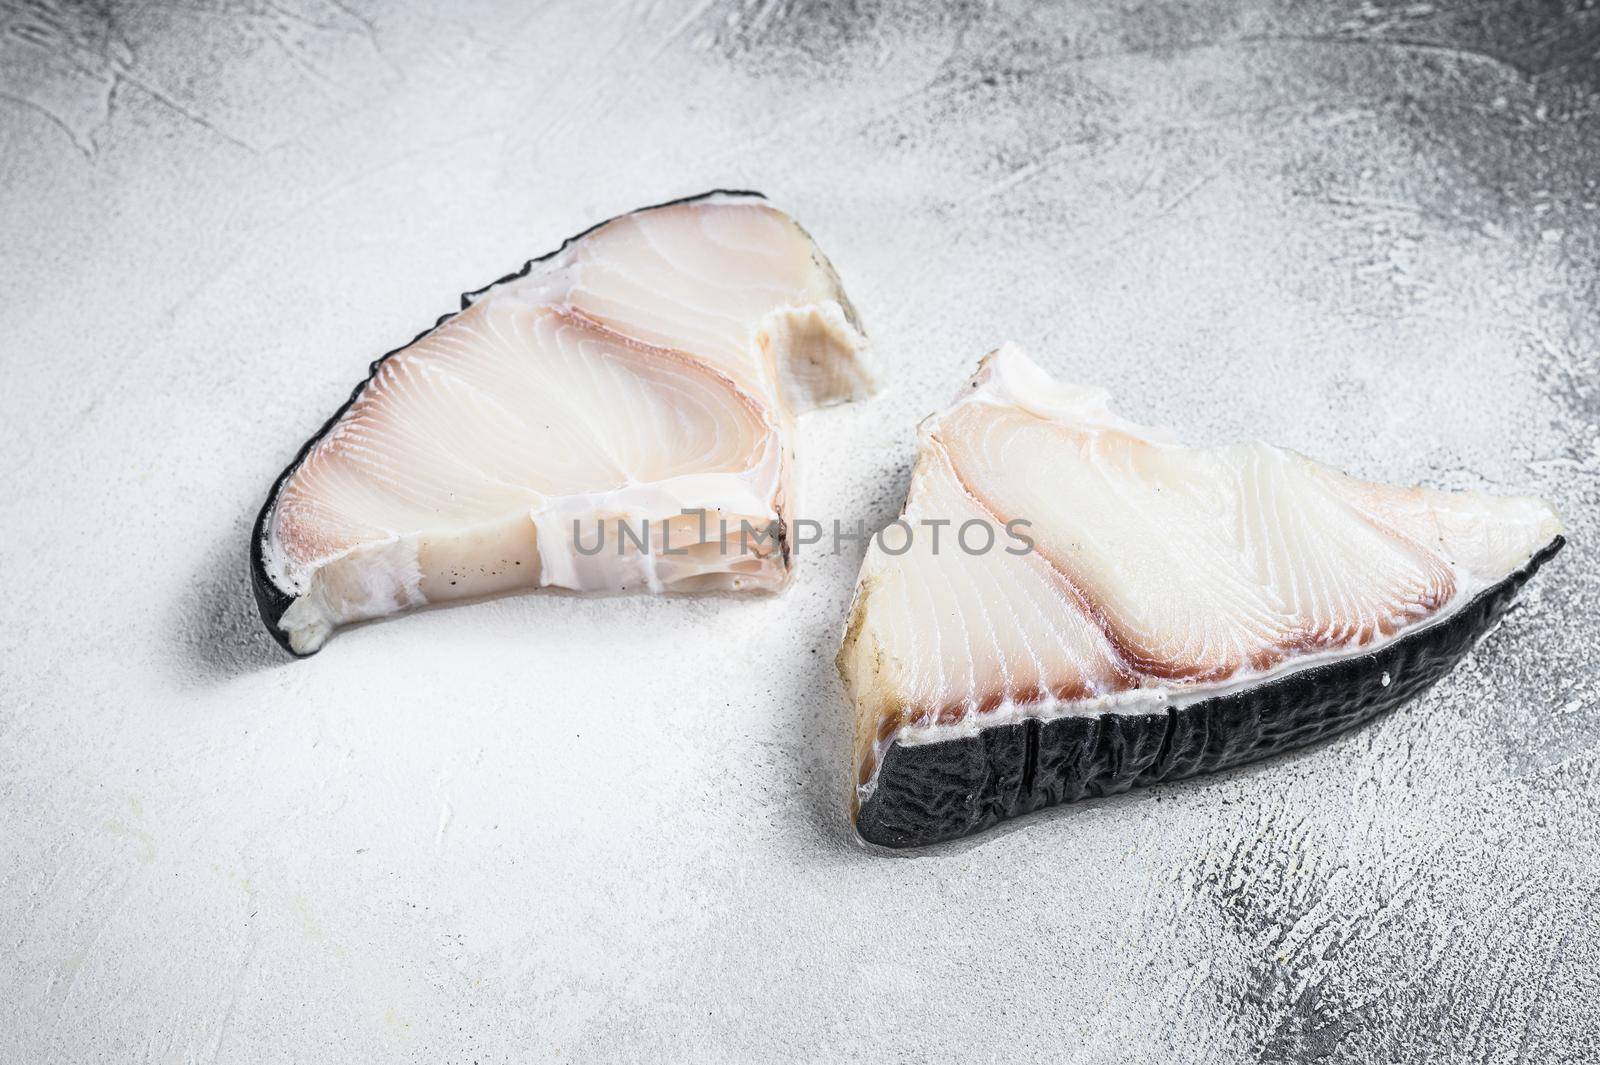 Raw Shark fish steaks on a kitchen table. White background. Top view by Composter